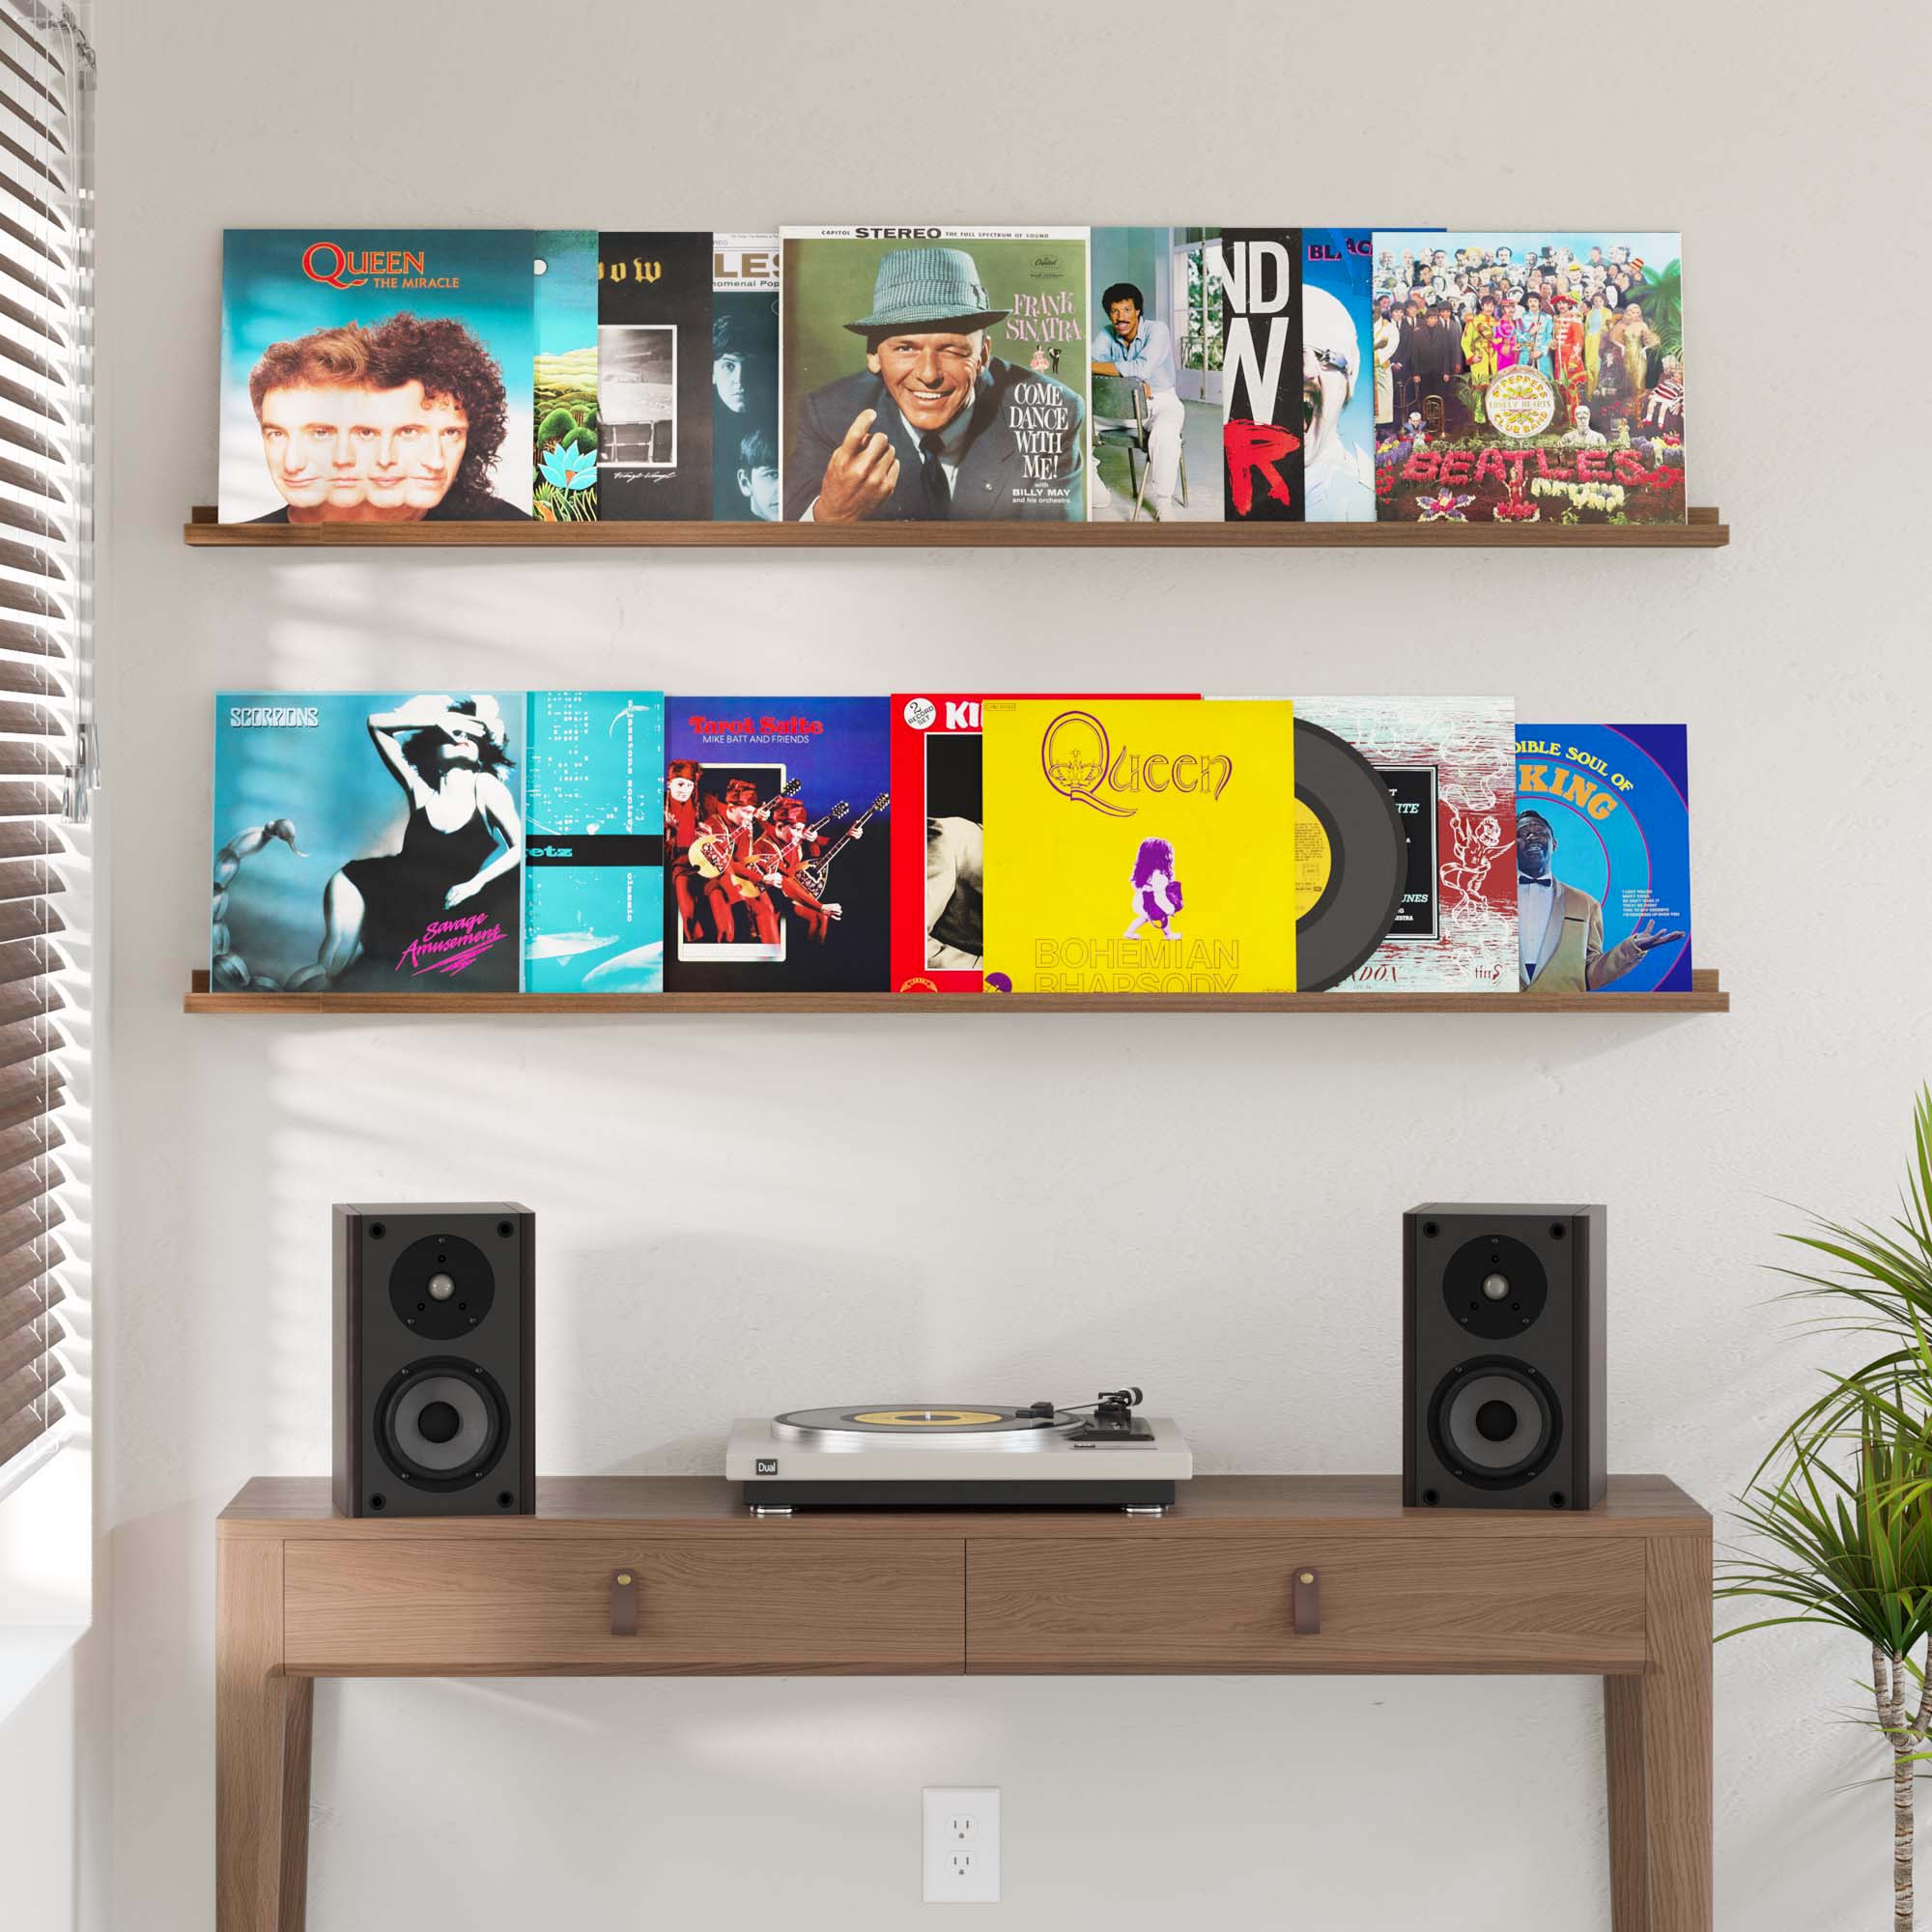 2 lego display shelves in a music-themed room holding a collection of classic vinyl album covers, complementing a turntable setup.